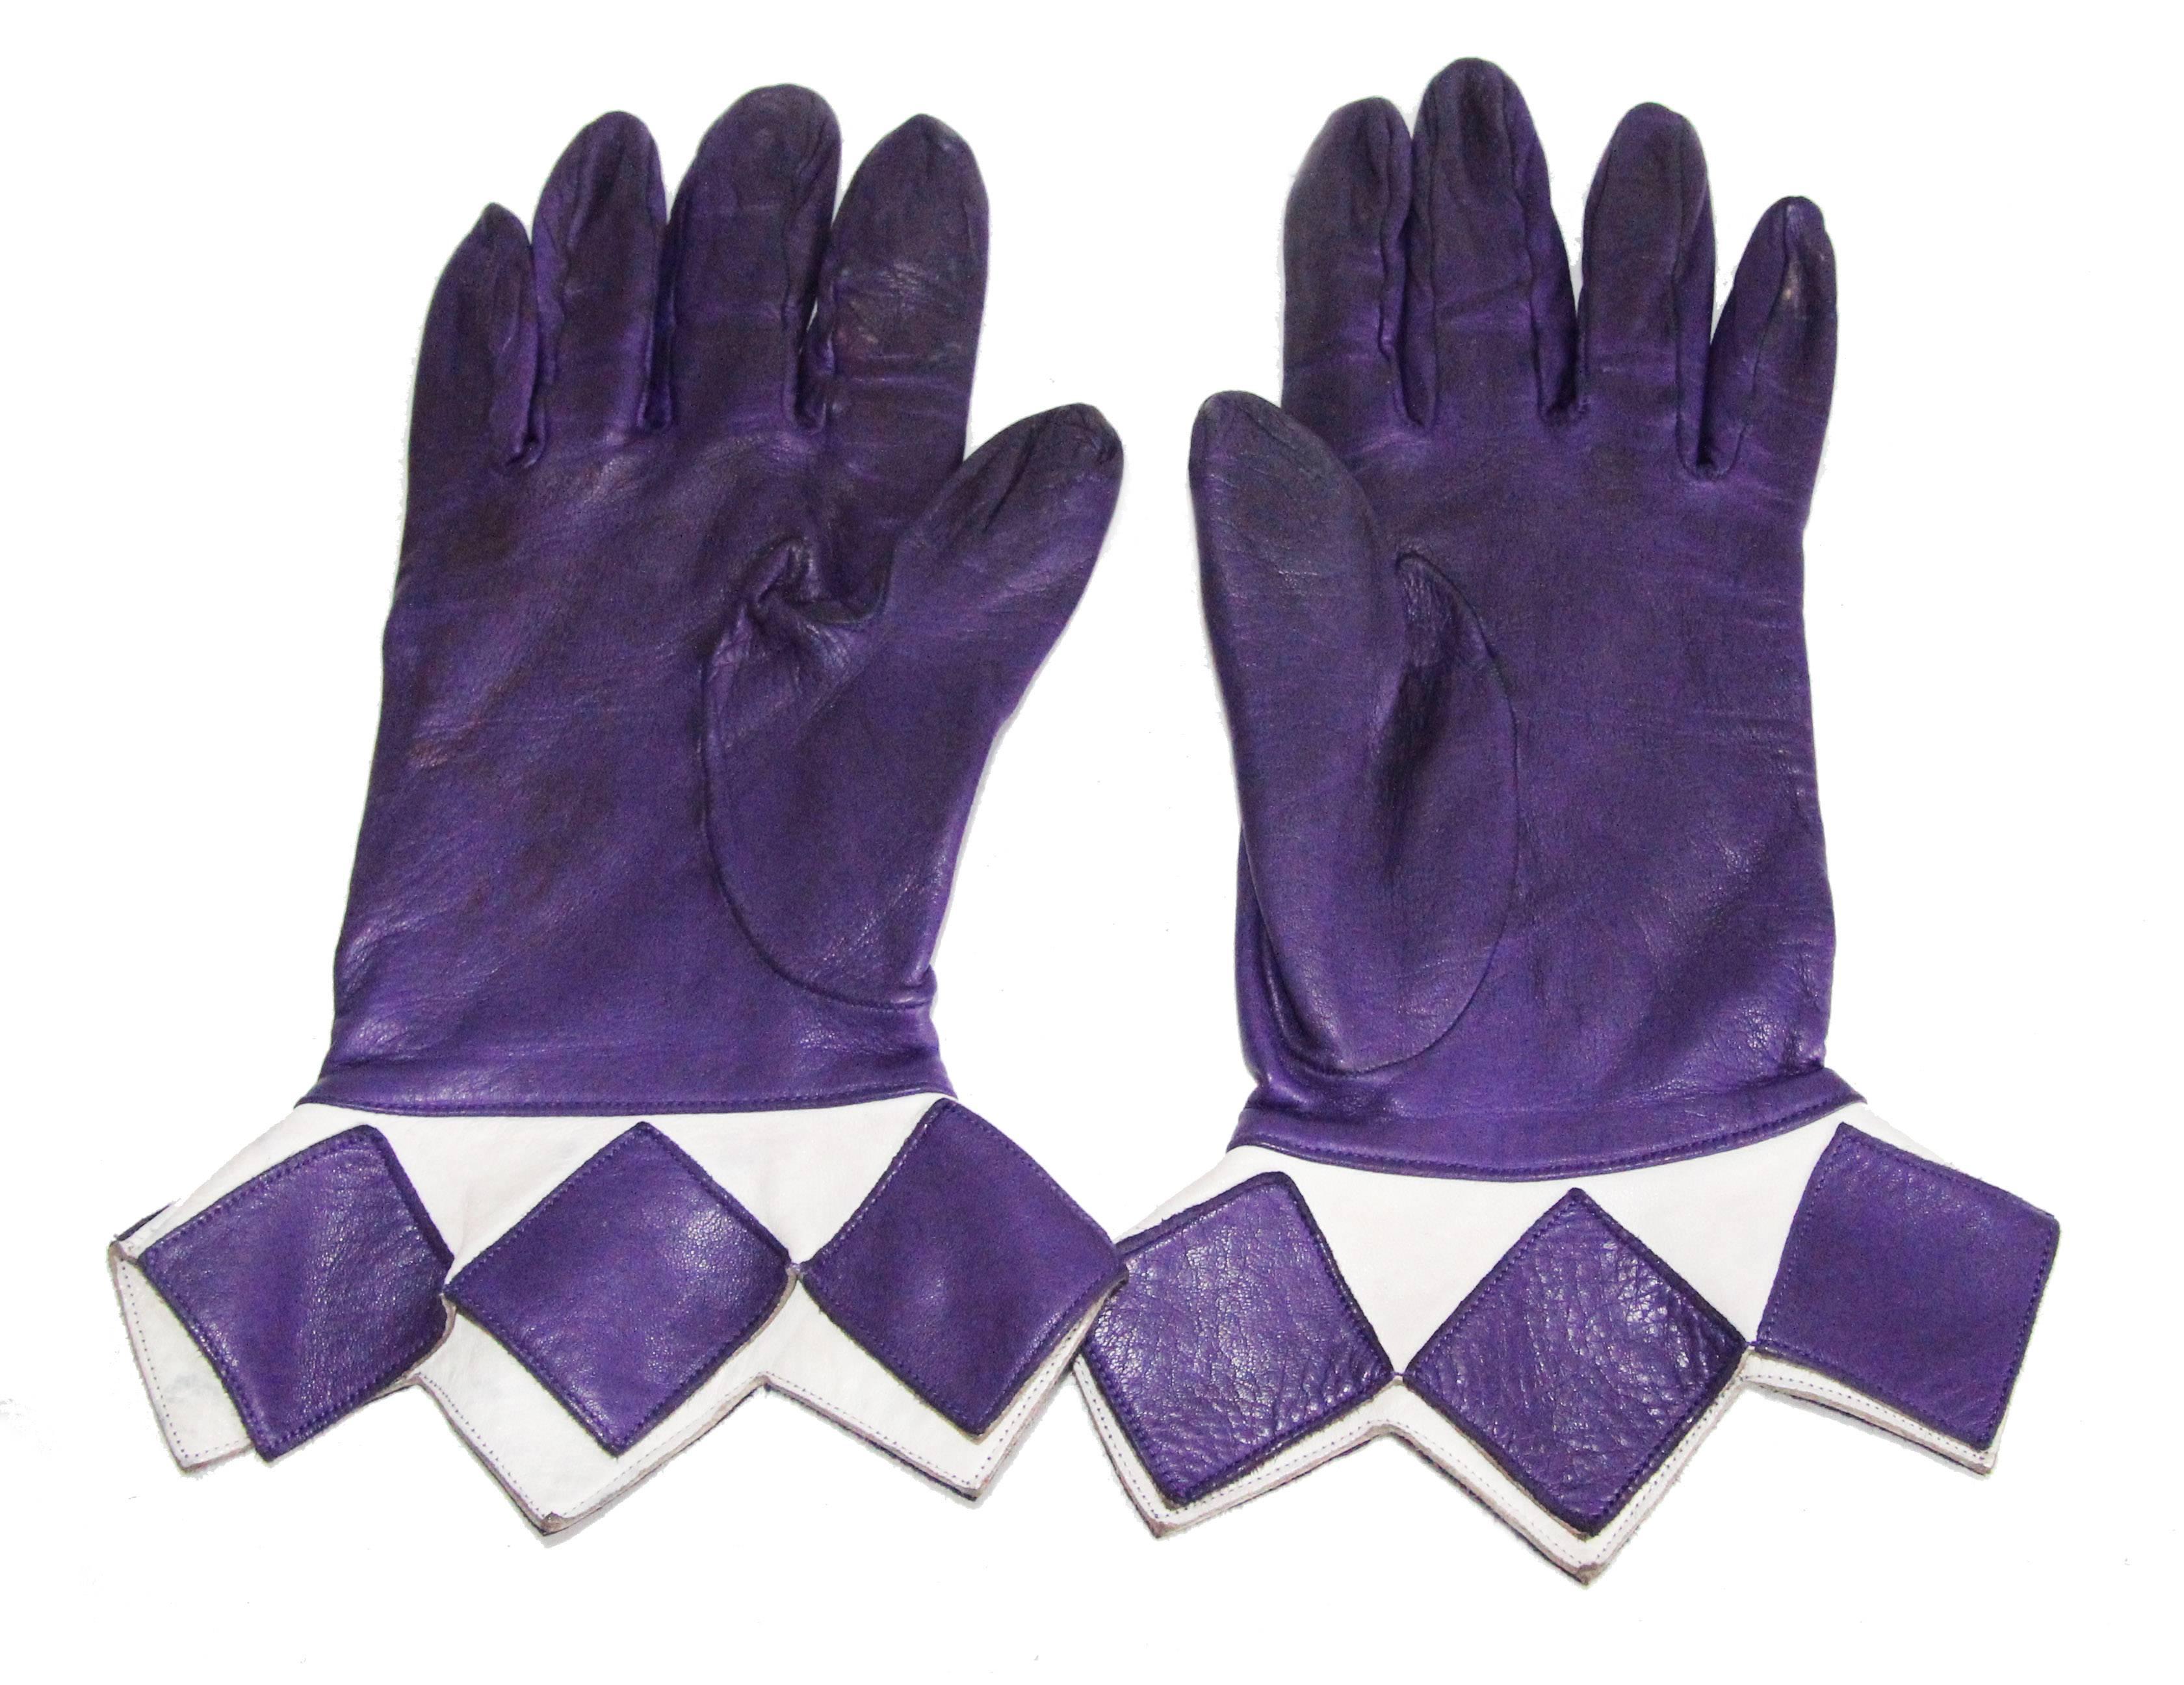 Exceptional Hermes Arlequin Vintage leather gloves of the 80s. Rare & collectable! just fabulous and so stylish. Calf leather. Marked: Hermès Paris Made in France. Very good vintage condition, nice leather patina. Size: 7 1/2. 